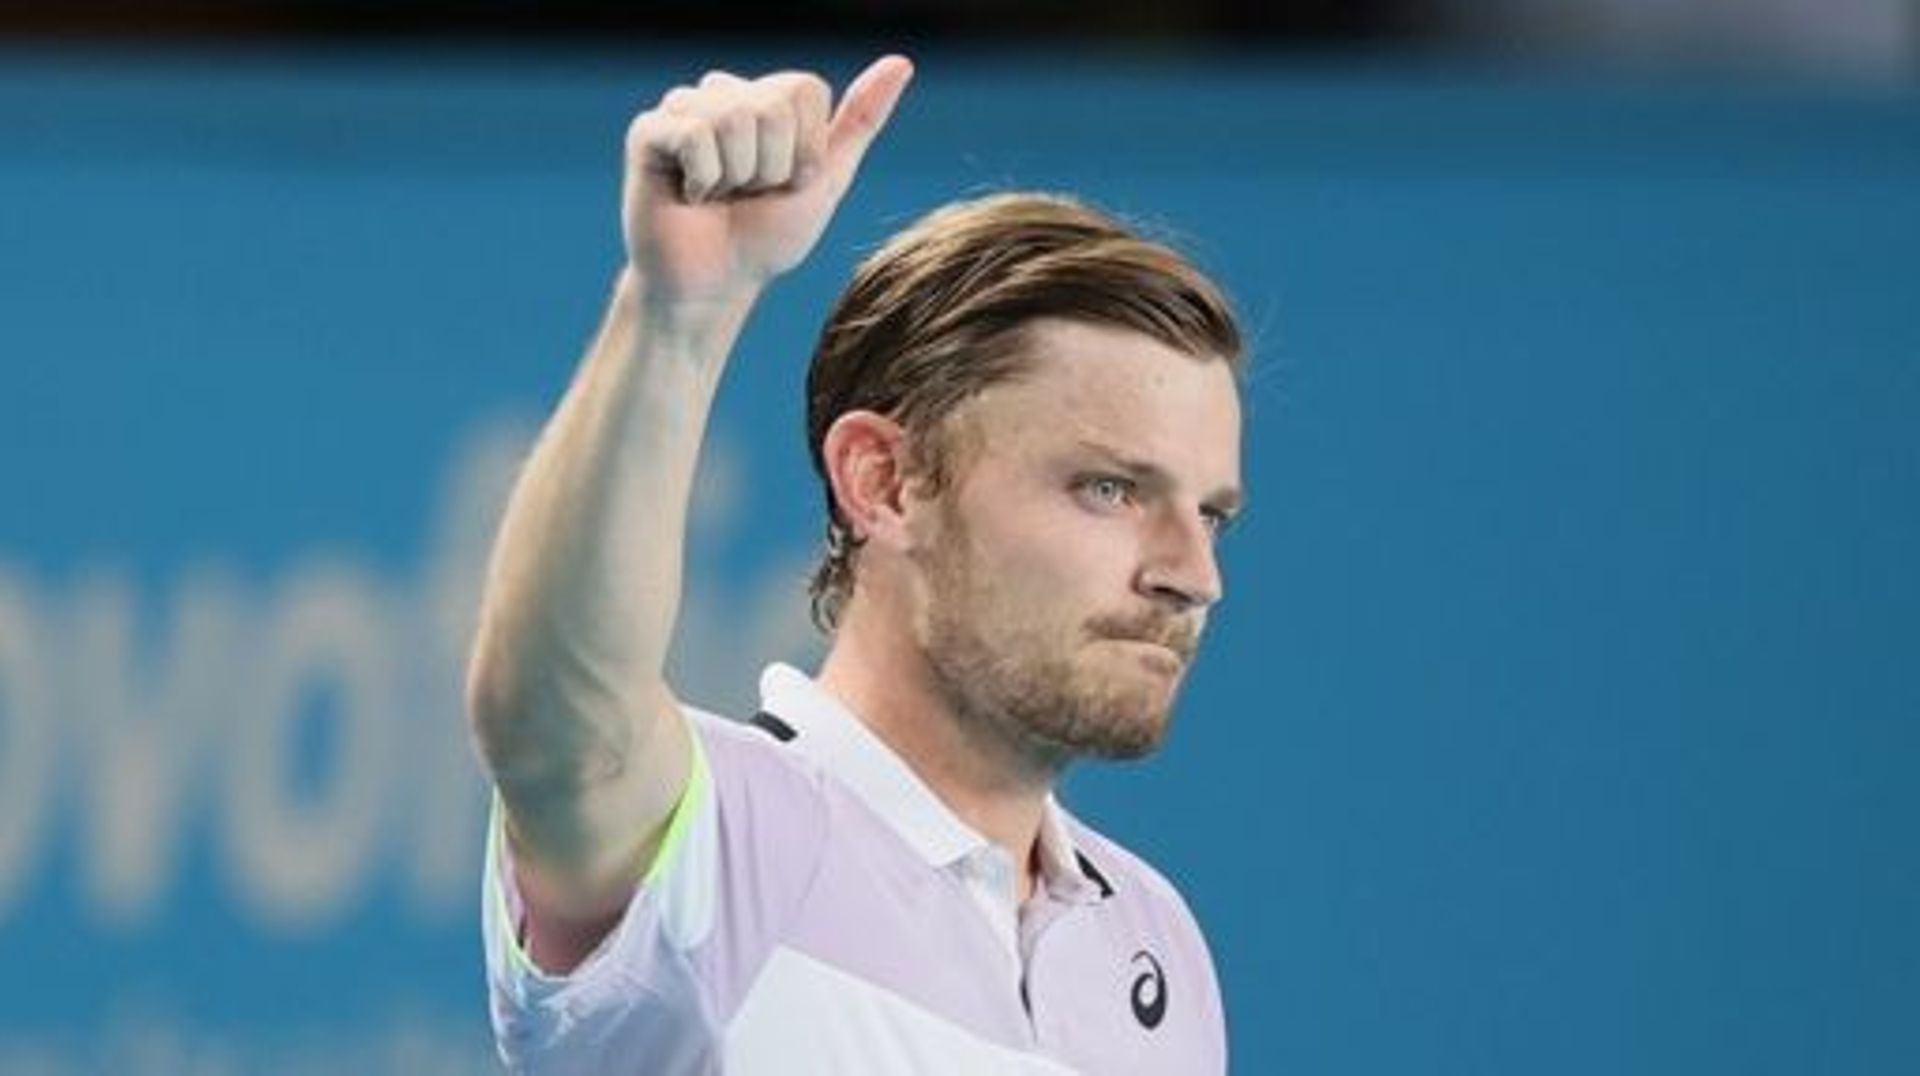 Belgian David Goffin celebrates after winning a tennis match between Belgians Goffin and Coppejans, Wednesday 25 January 2023 in Louvain-la-Neuve, in the first round of the men's singles at the BW Open ATP Challenger tournament.  BELGA PHOTO BENOIT DOPPAG